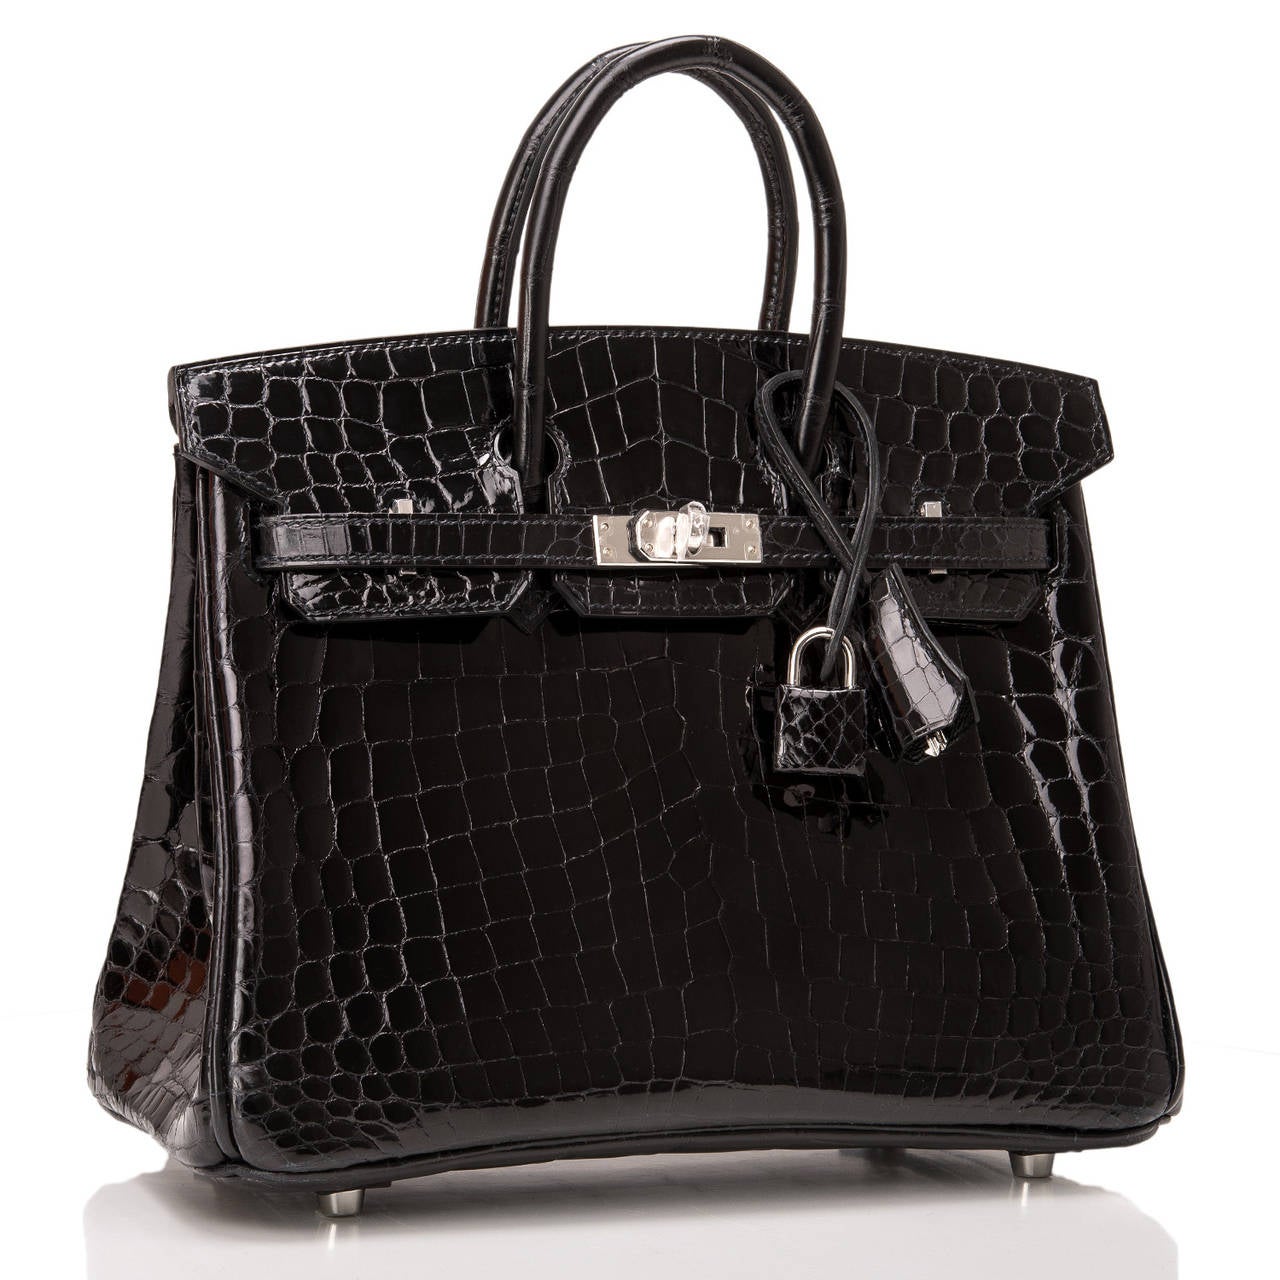 Hermes Black Birkin 25cm in niloticus crocodile with palladium hardware.

This style features tonal stitching, front toggle closure, clochette with lock and two keys, and double rolled handles.

The interior is lined in Black chevre with one zip